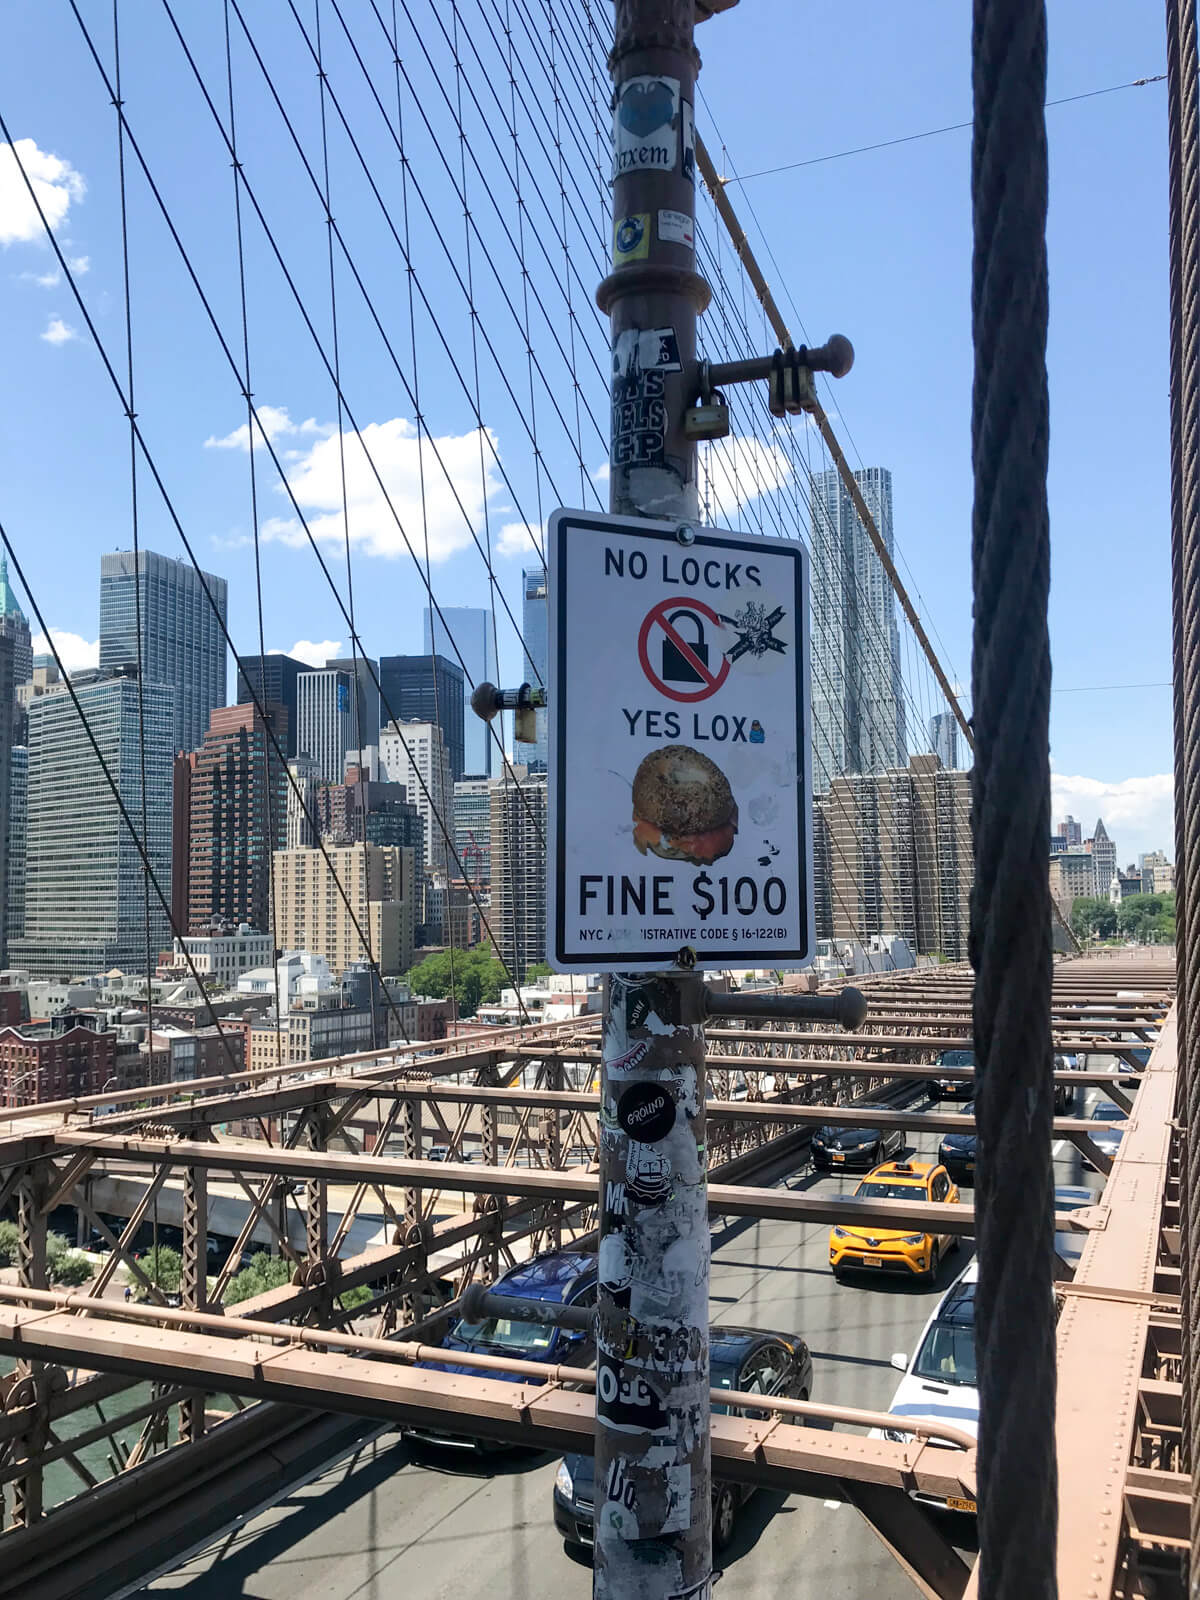 A sign on the structure of a bridge reading â€œNO LOCKS, YES LOX, FINE $100â€� showing an icon of a lock crossed out, and a burger with smoked salmon